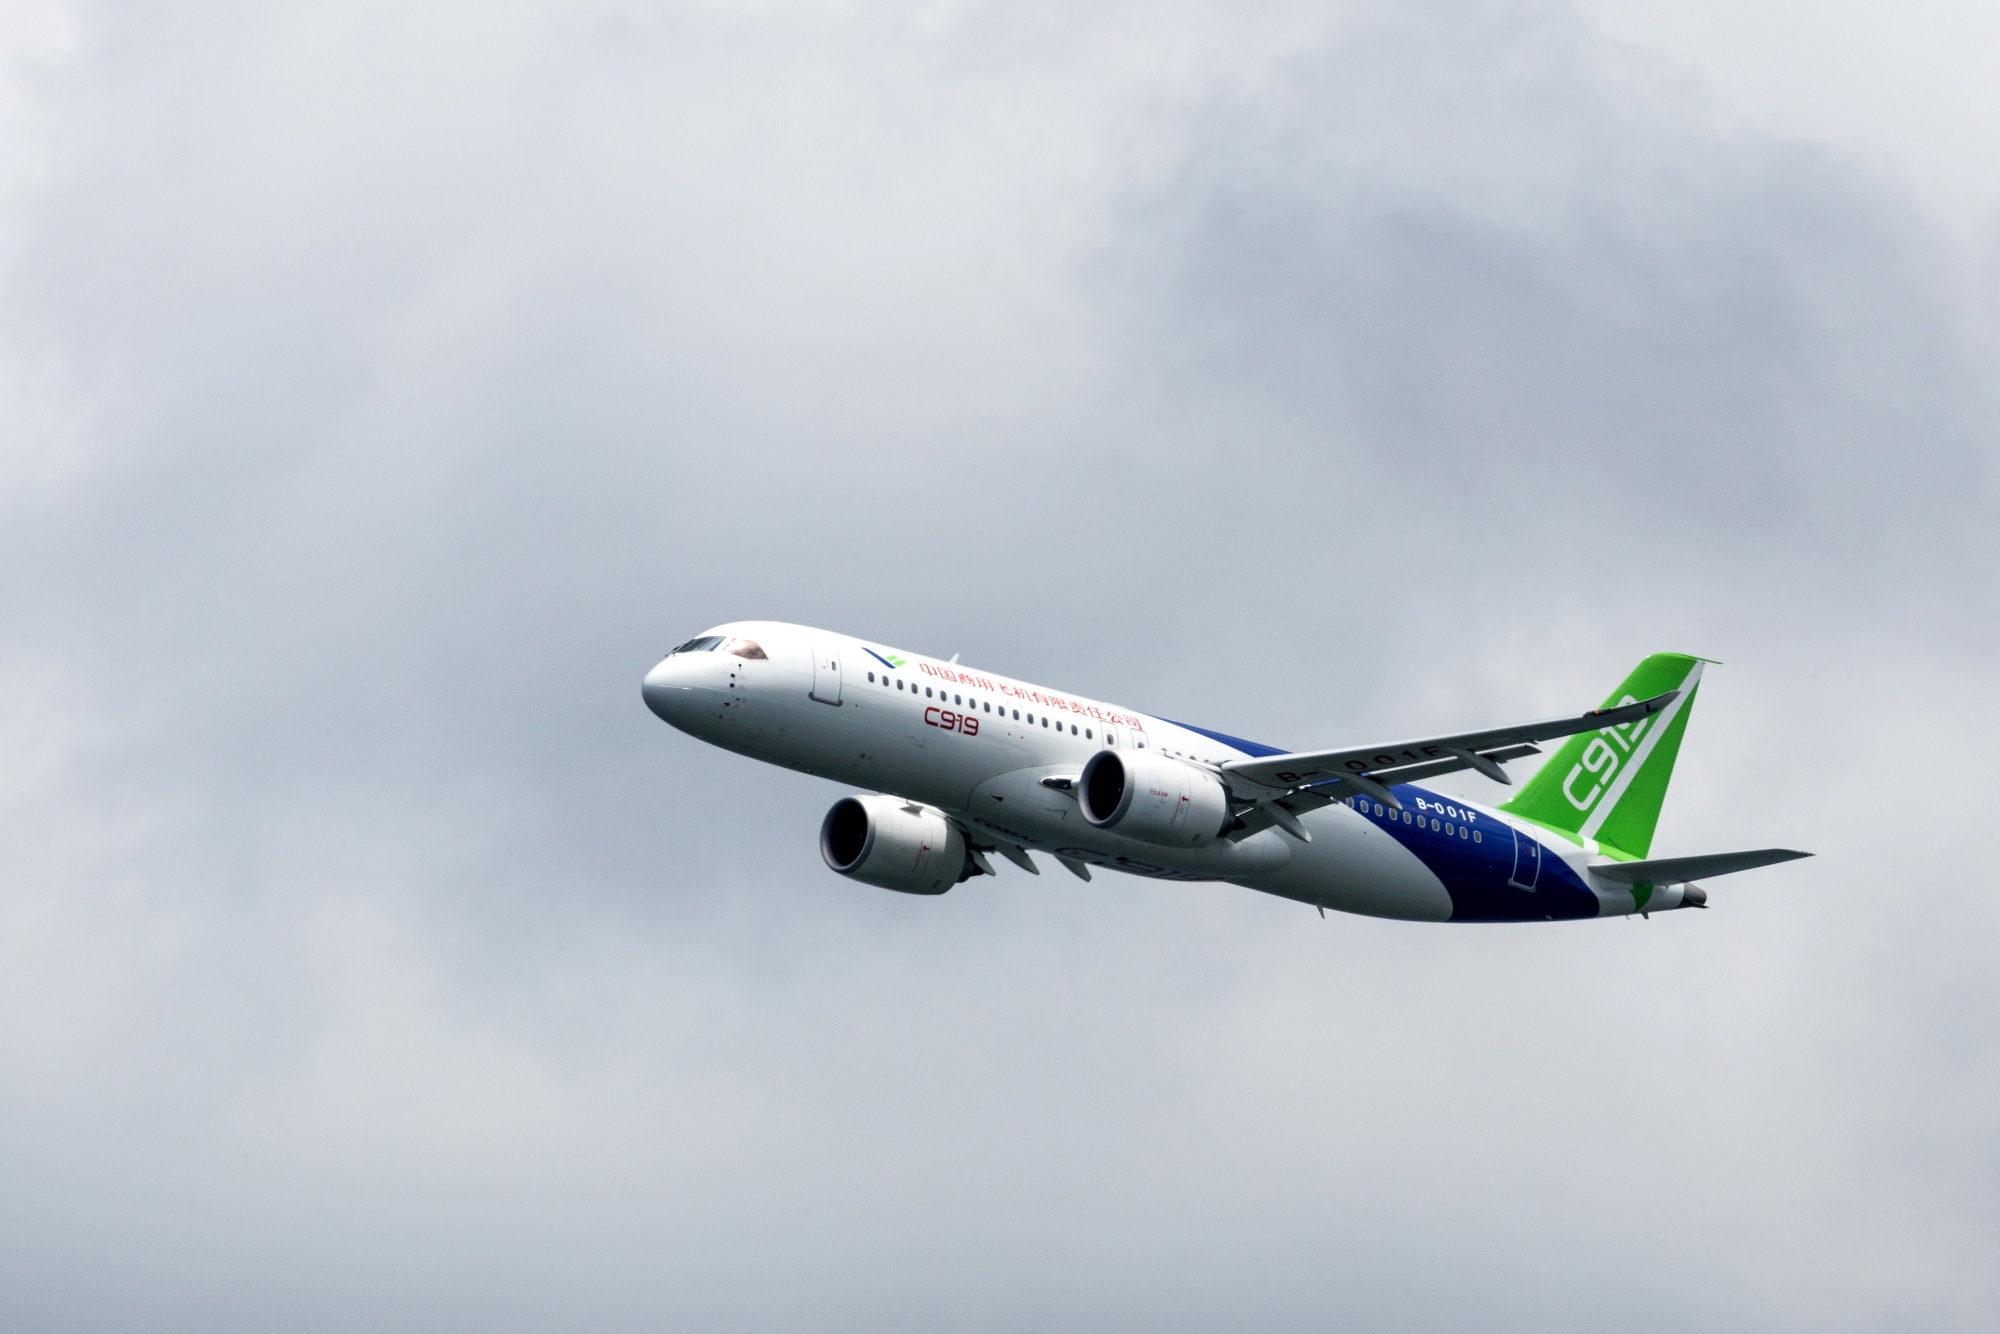 The C919 at the Singapore Airshow, the plane’s first international debut.